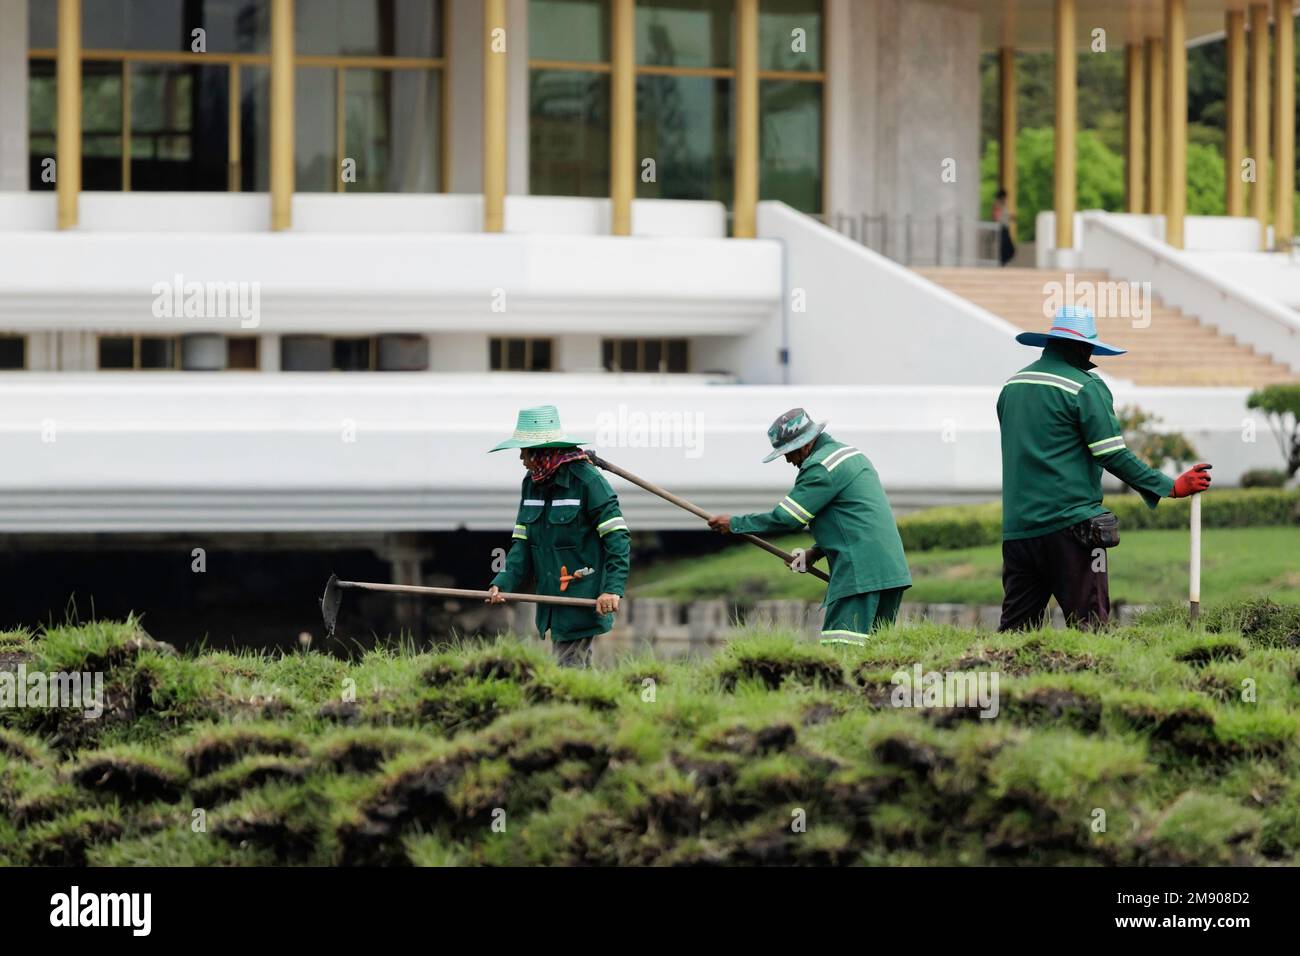 Bangkok, Thailand - October 12, 2020 : Asian gardener man and woman worker working and digging soil to prepare planting grass in the city park. Stock Photo